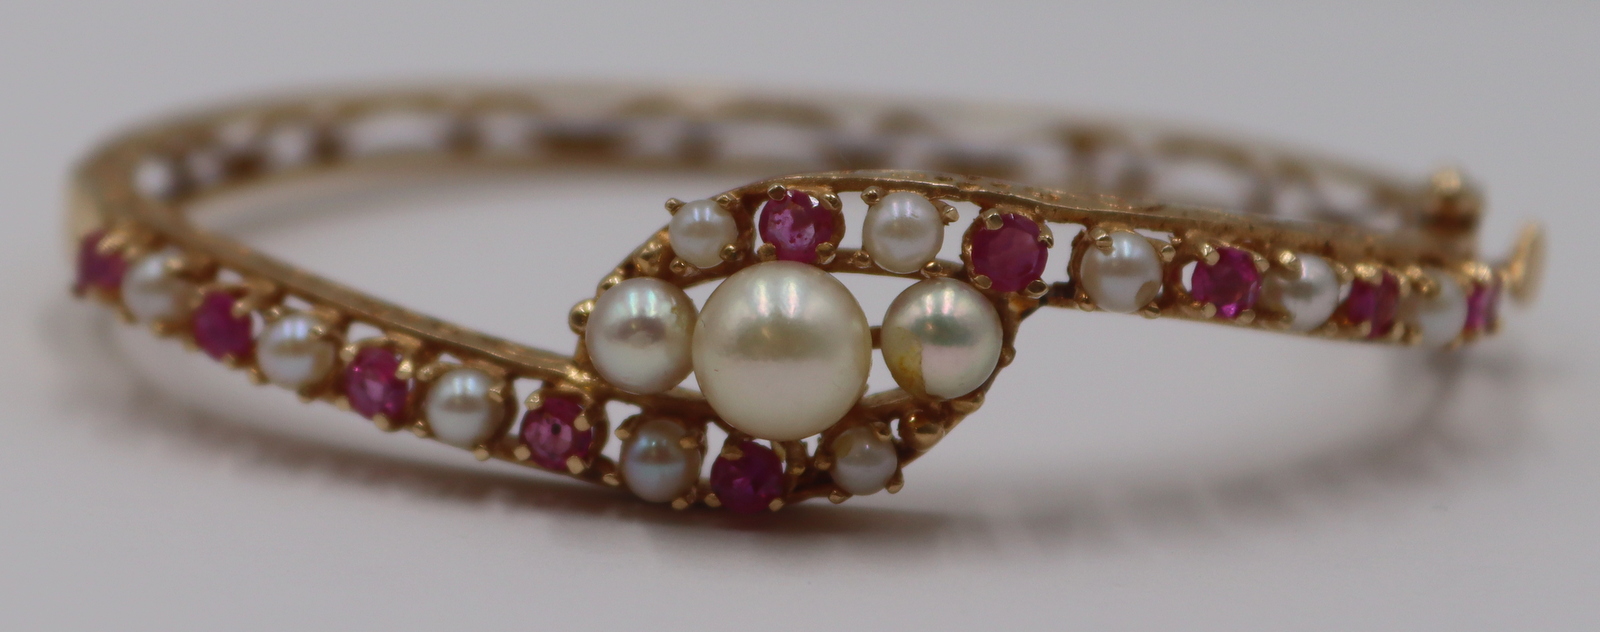 JEWELRY. 14KT GOLD, PEARL, AND